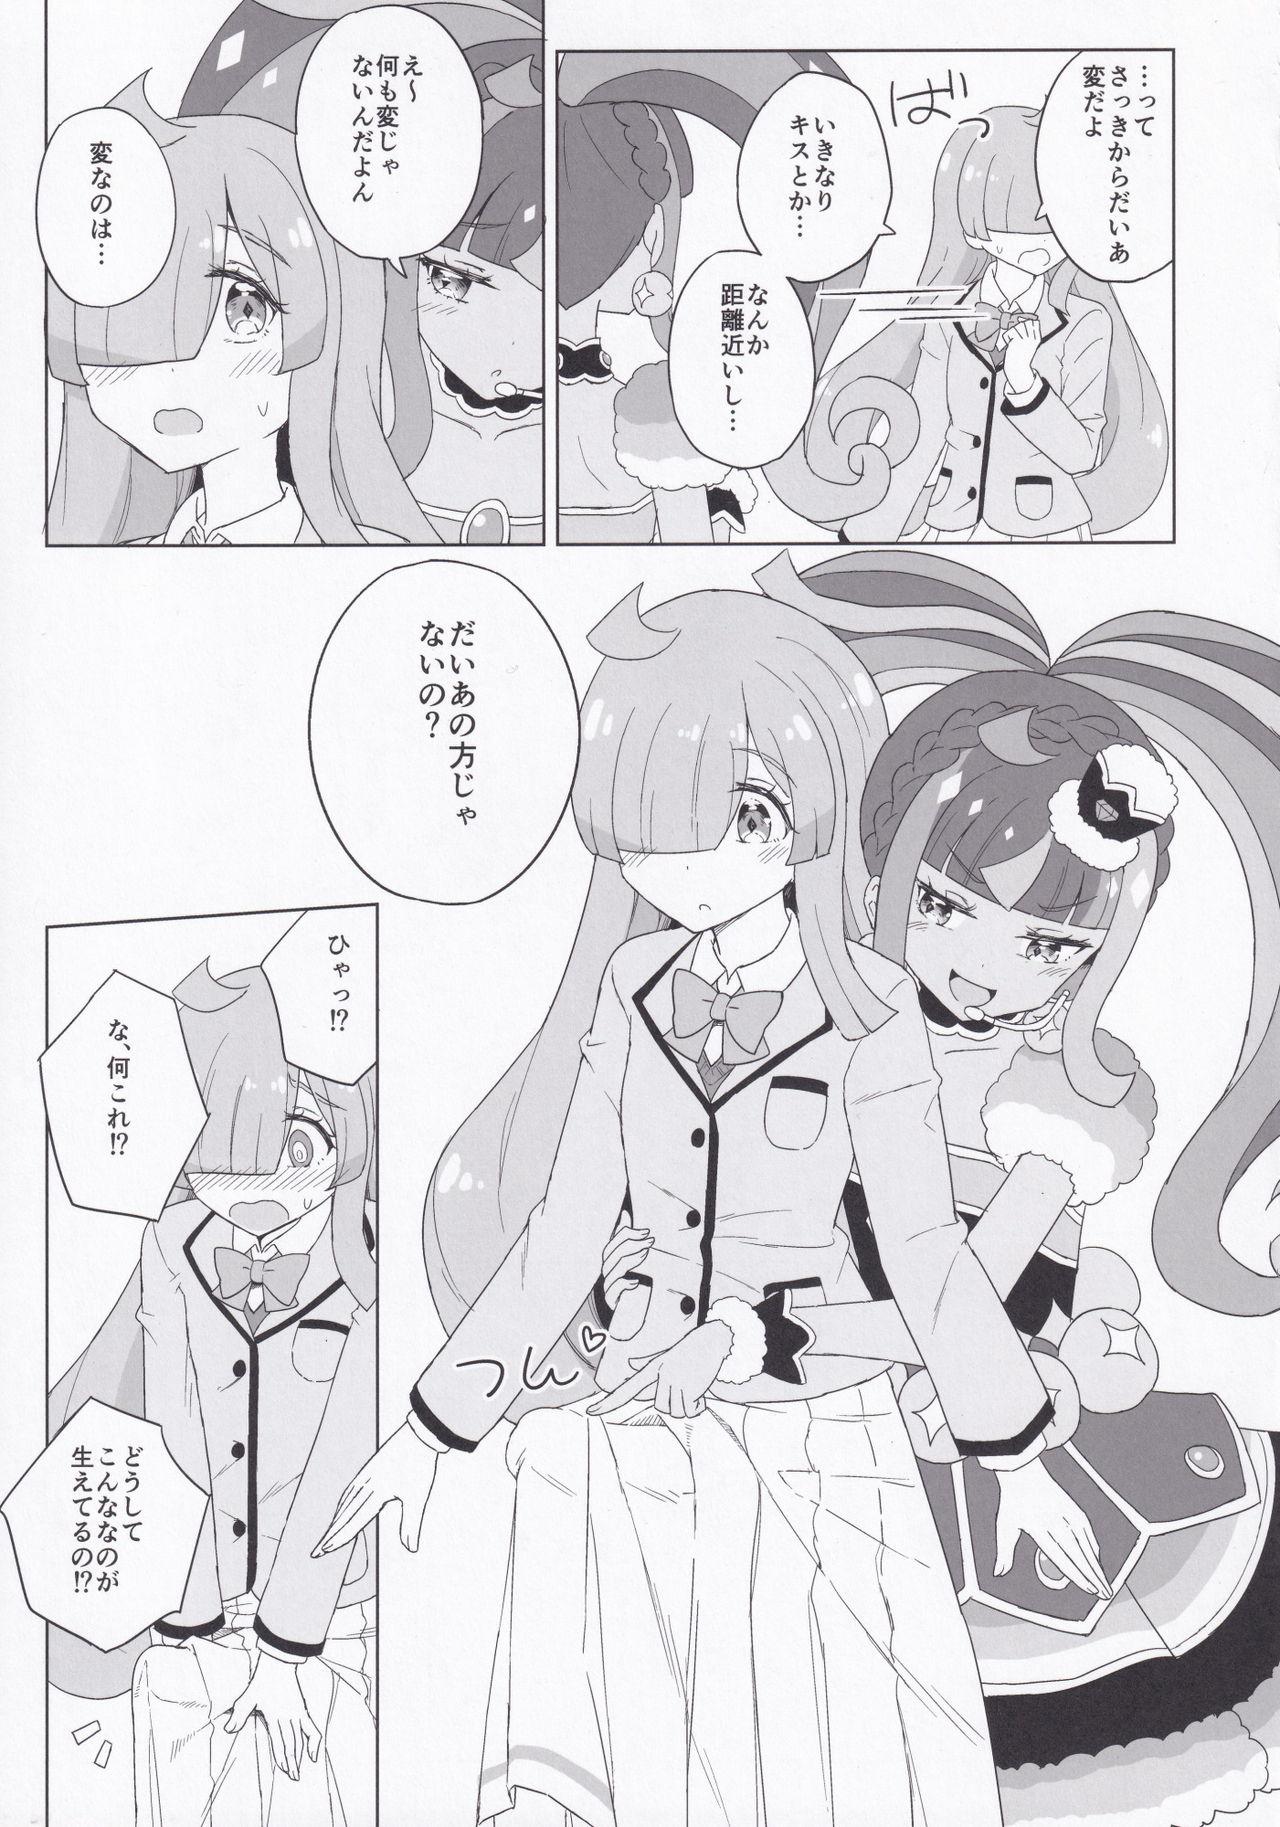 Hot ANOTHER WORLD CHANNEL - Kiratto pri chan Asia - Page 8